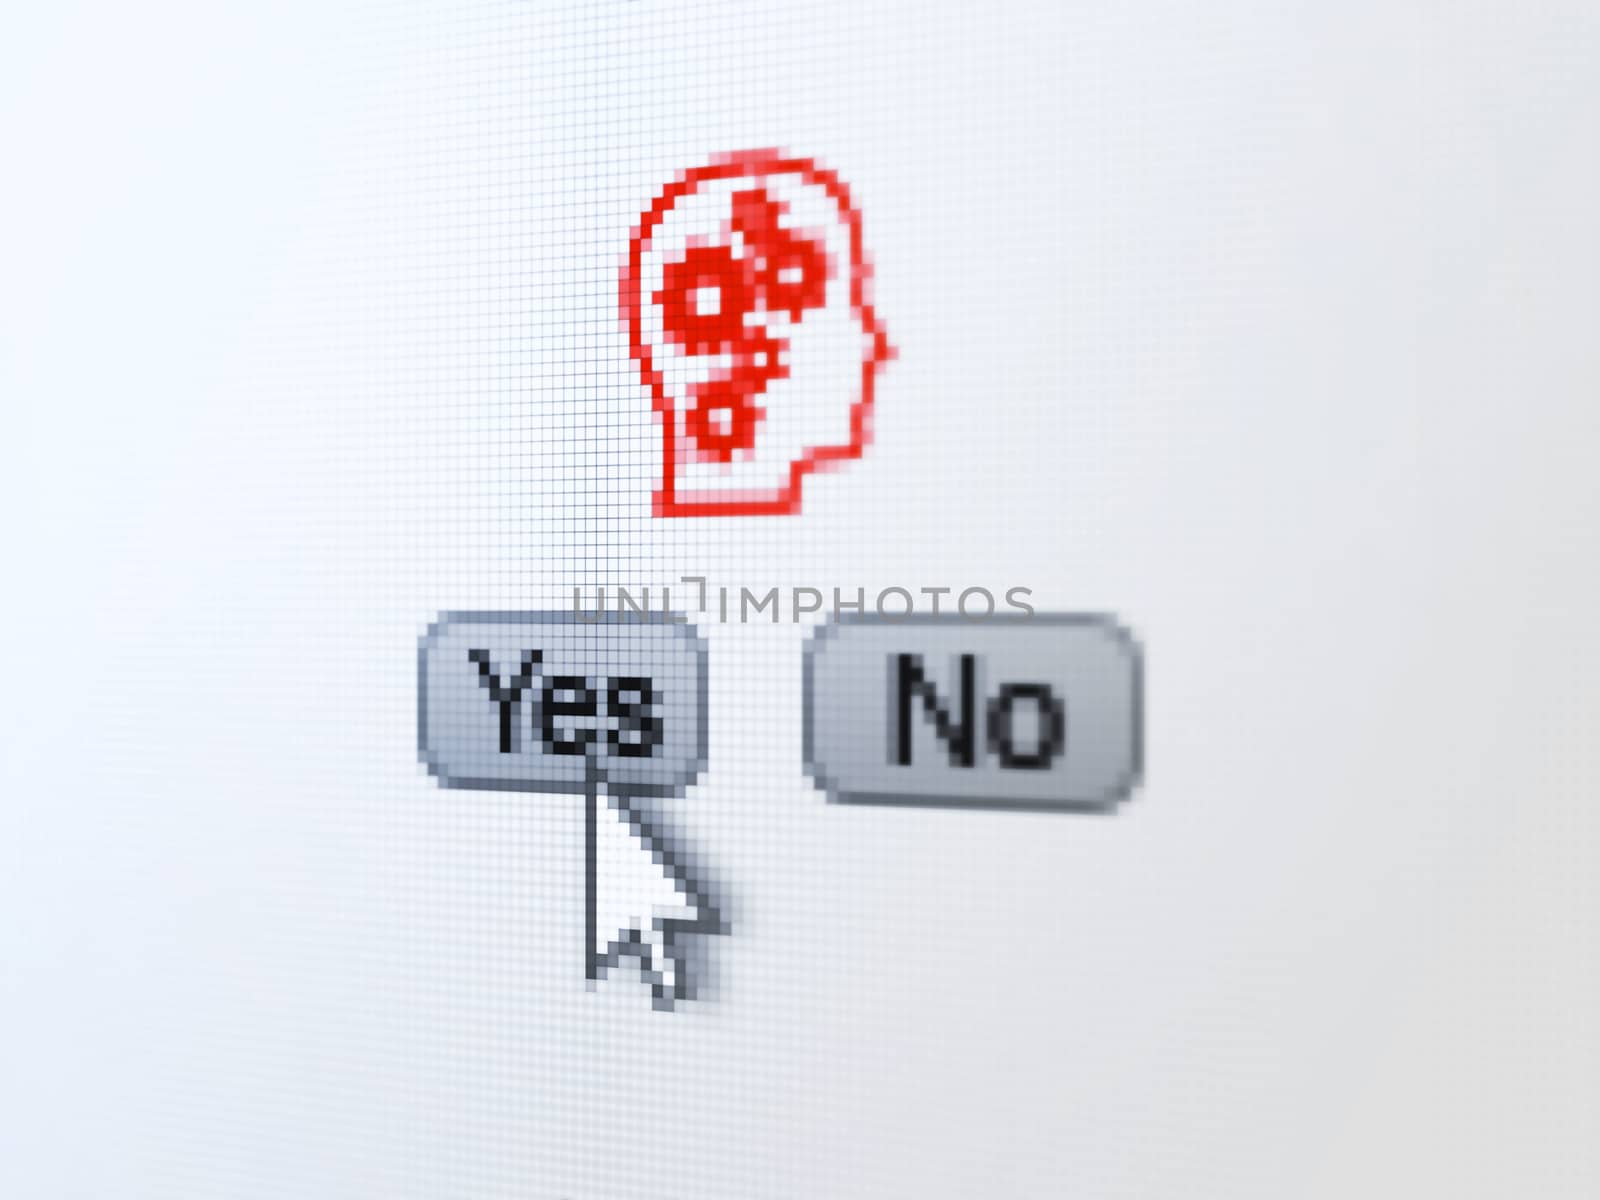 Data concept: buttons yes and no with pixelated Head With Gears icon and Arrow cursor on digital computer screen, selected focus 3d render